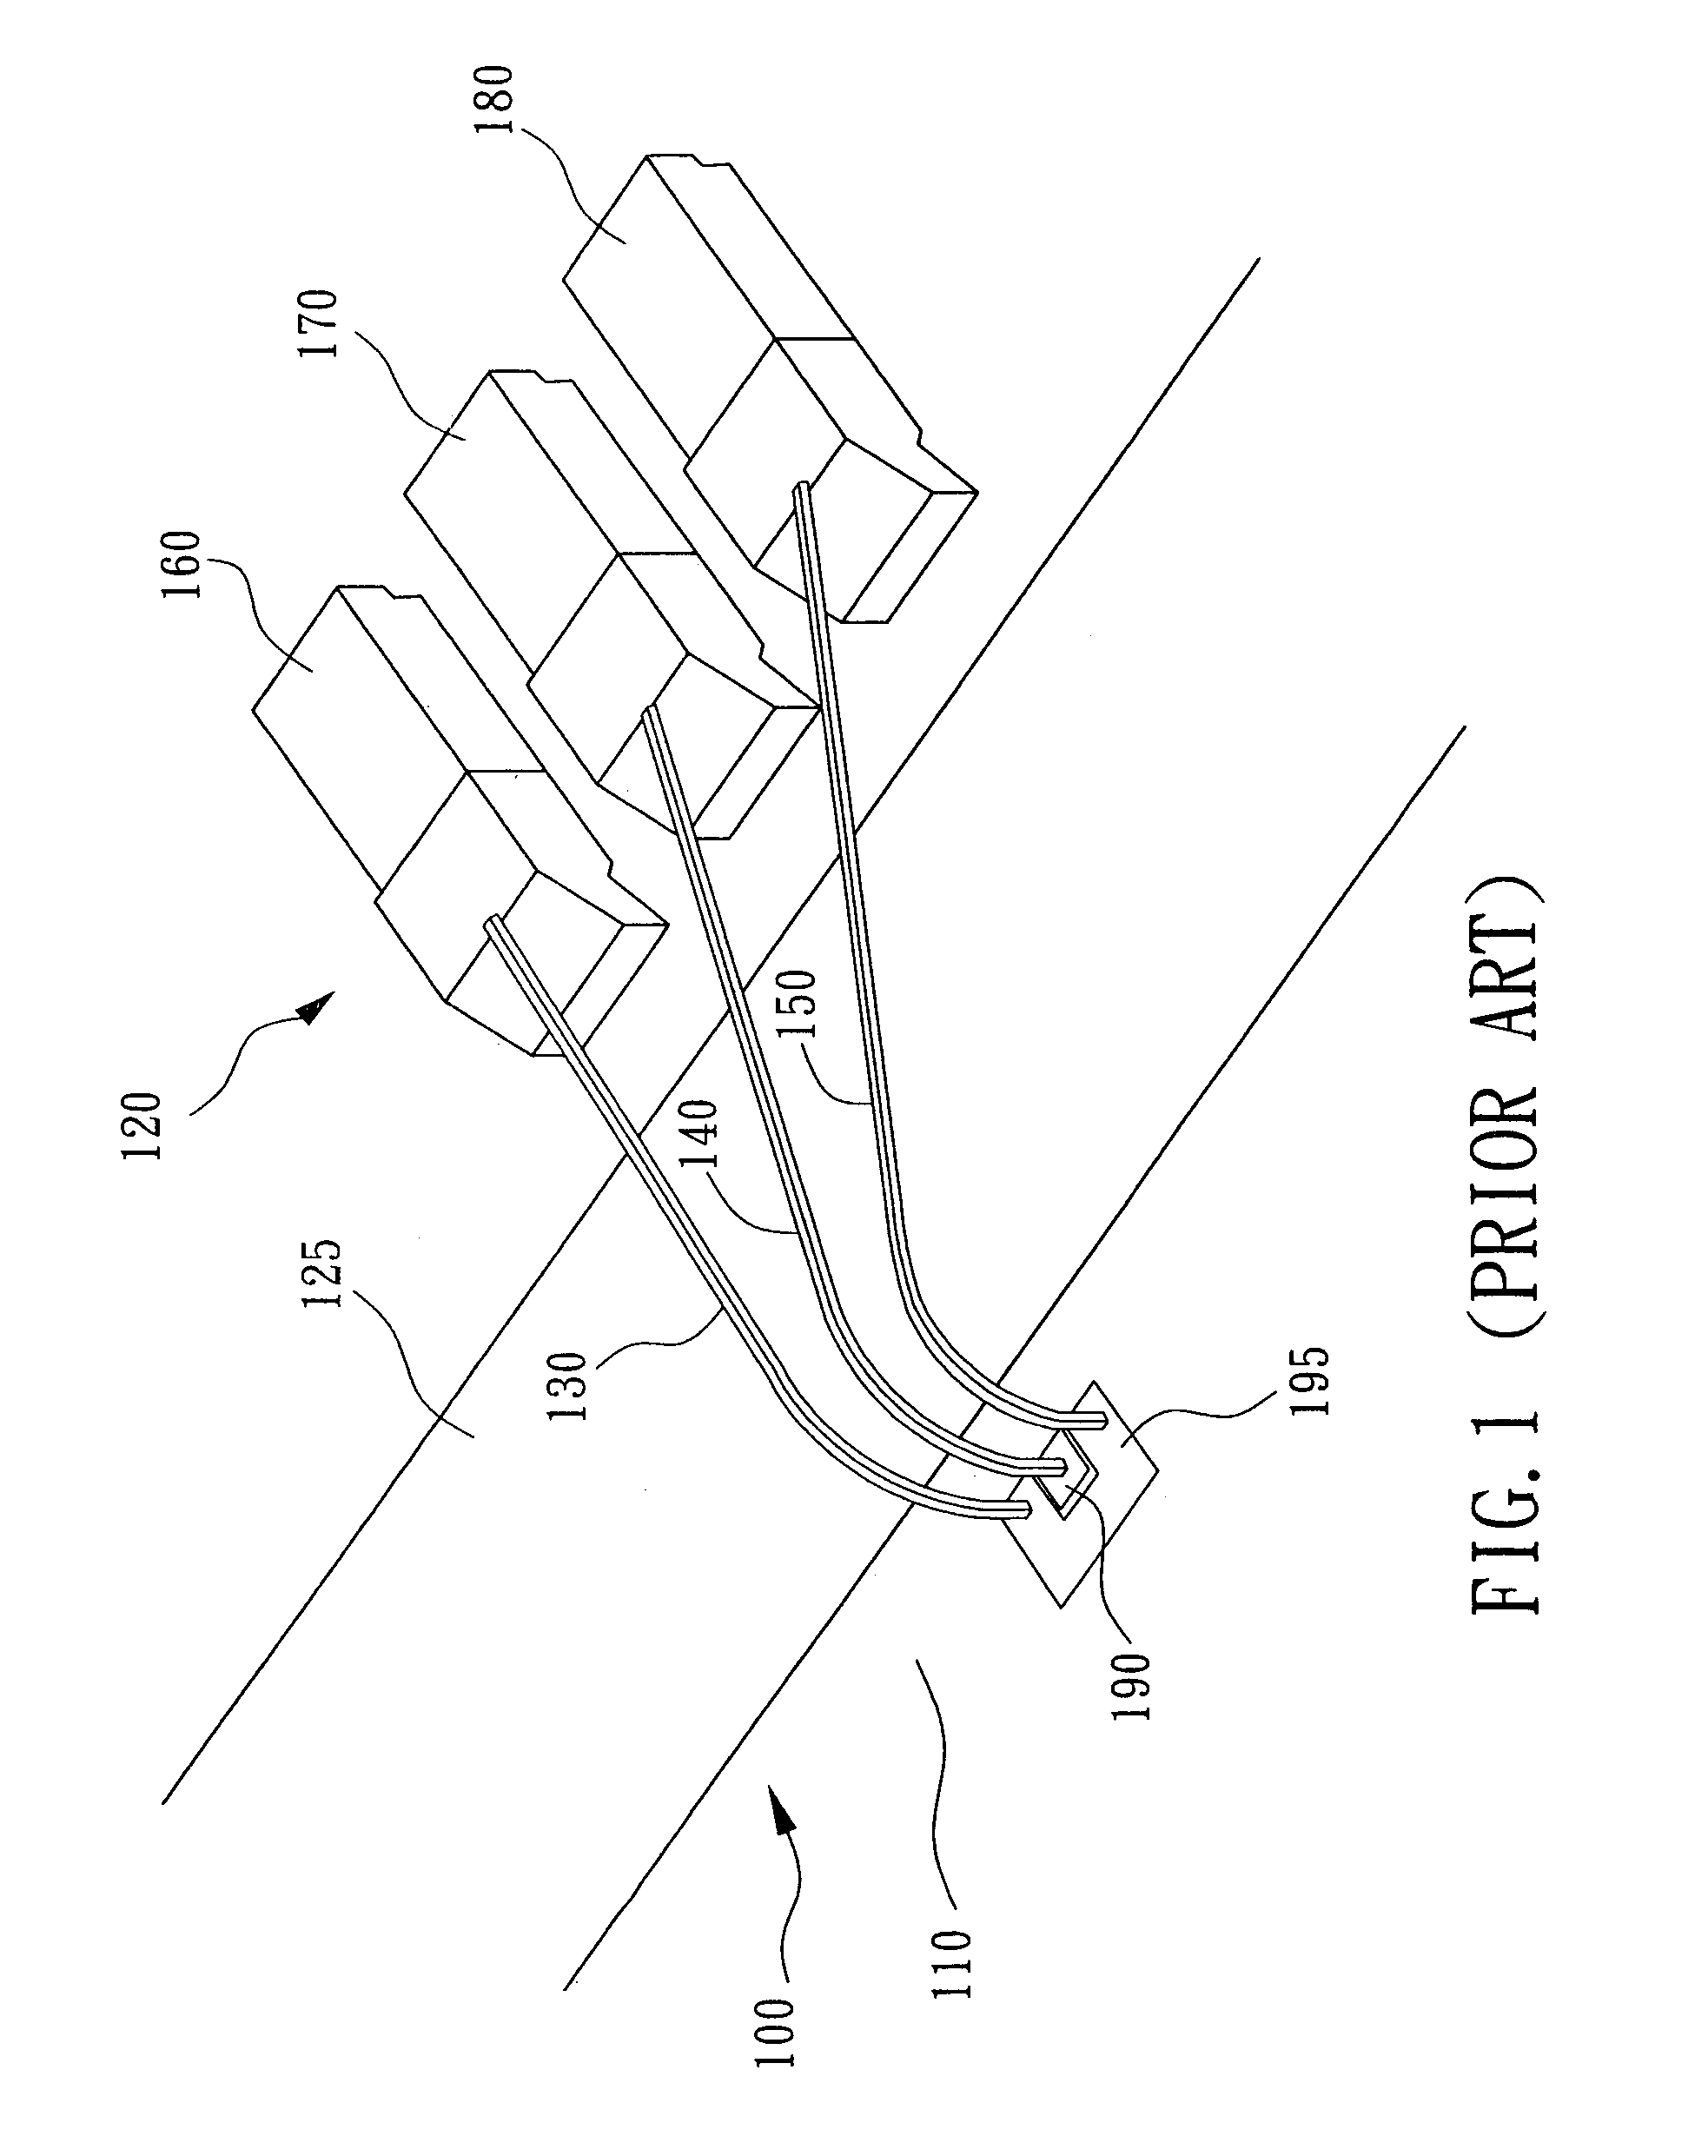 Structure of multi-tier wire bonding for high frequency integrated circuit